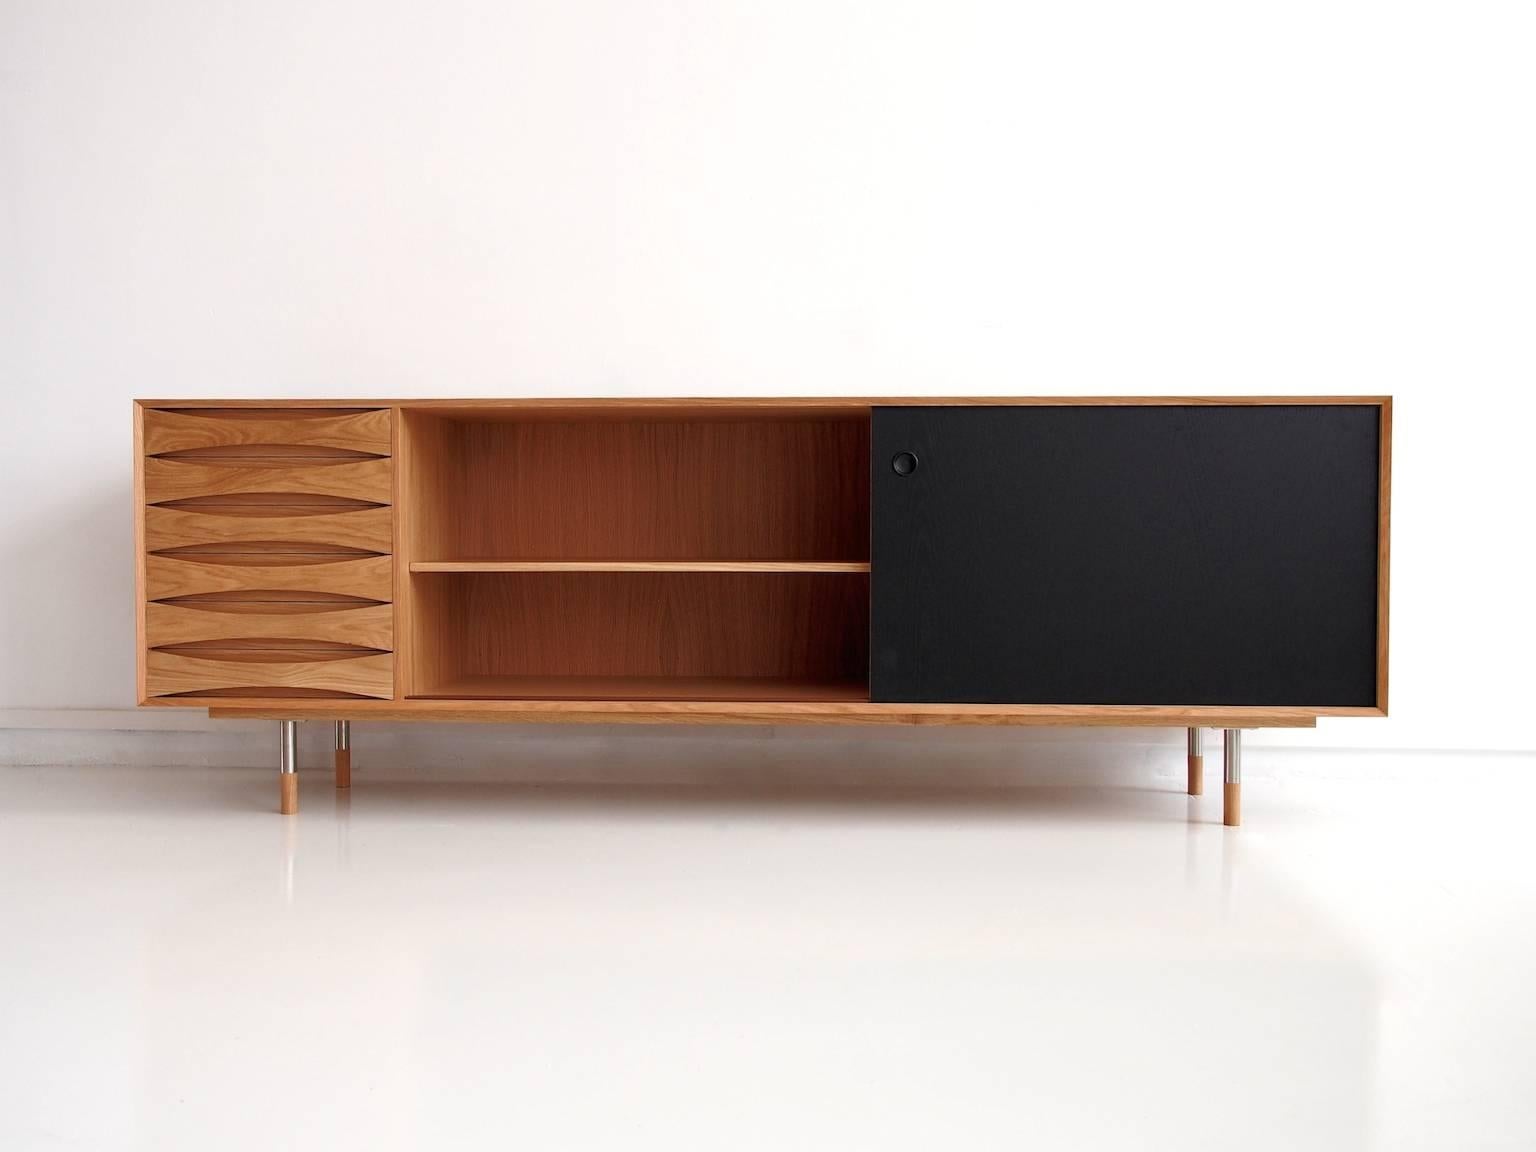 Oil-treated oak sideboard attributed to Arne Vodder. Reversible sliding doors in oak and black varnish. Left side with six drawers. Round steel legs with oak caps.